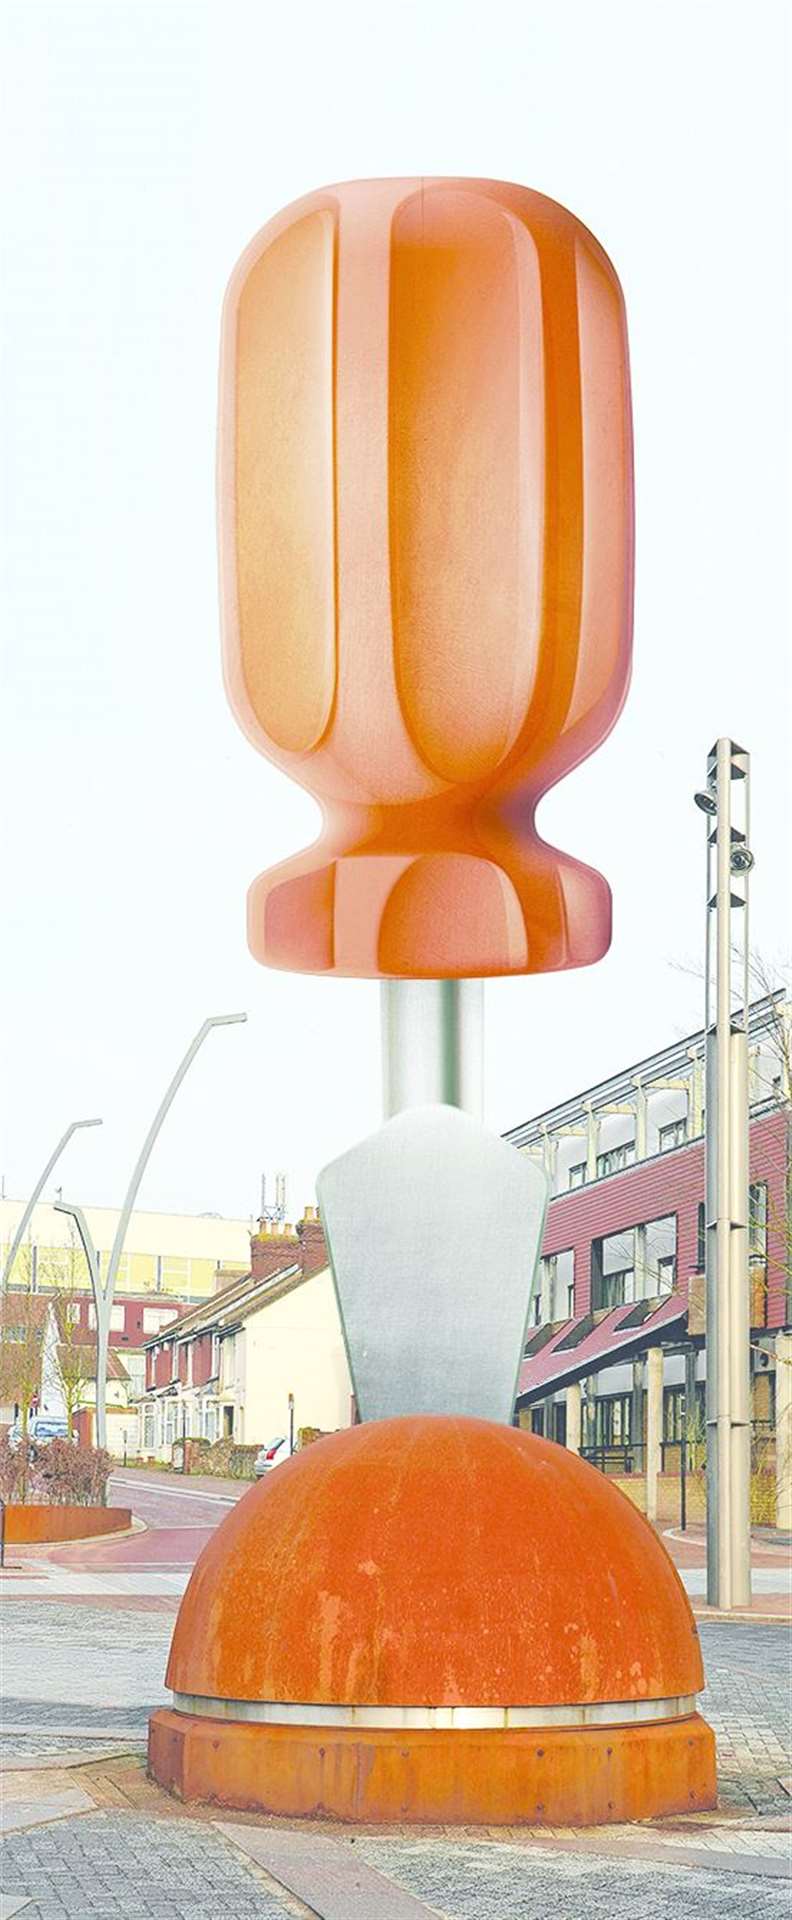 Artist Joe King suggested the structure could be revamped with the addition of a giant screwdriver